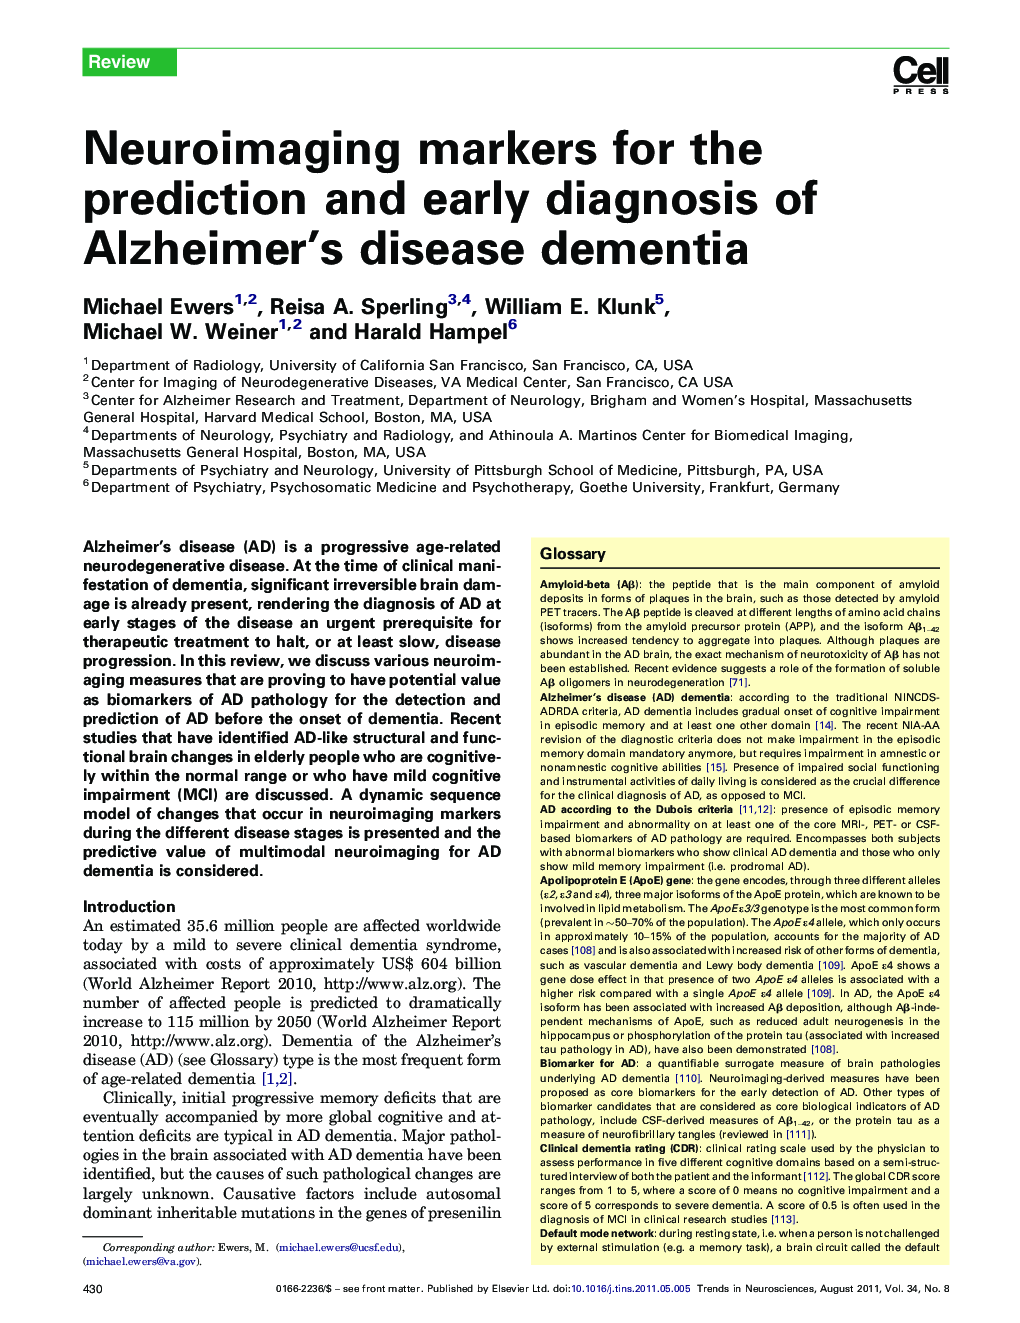 Neuroimaging markers for the prediction and early diagnosis of Alzheimer's disease dementia